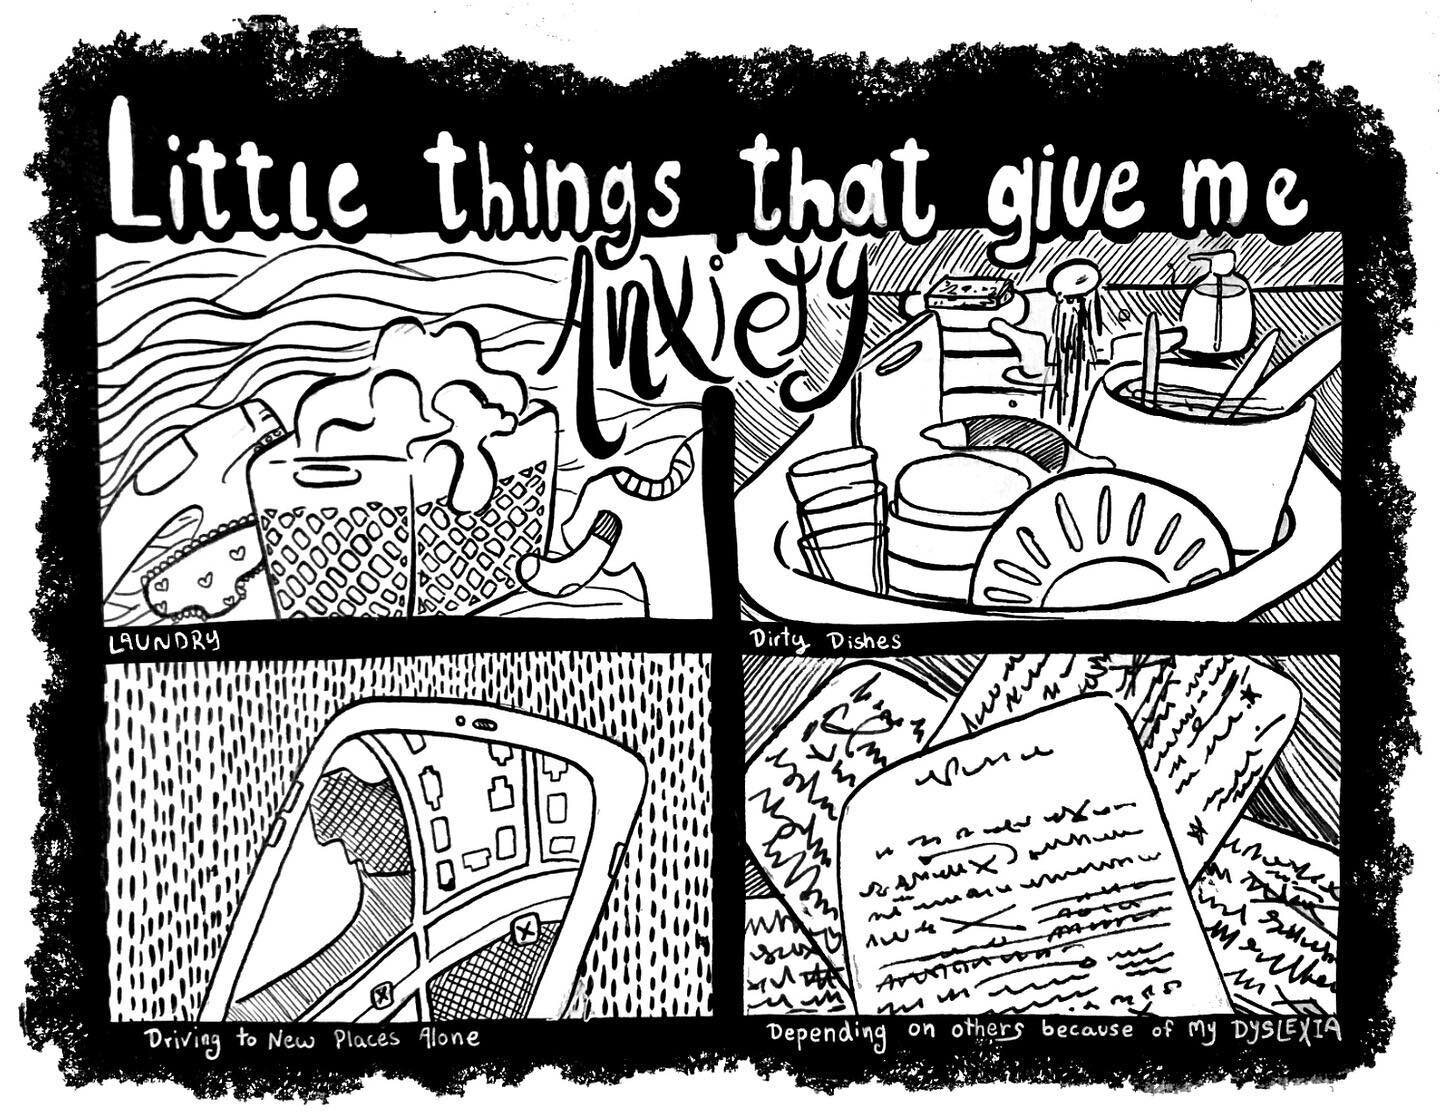 This comic was created for my comic class that I am teaching. 

Real talk: let's talk about anxiety! 
Three out of the four things I listed seem pretty simple. But they are immensely more complex than just &ldquo;doing laundry.&rdquo; Many of these a